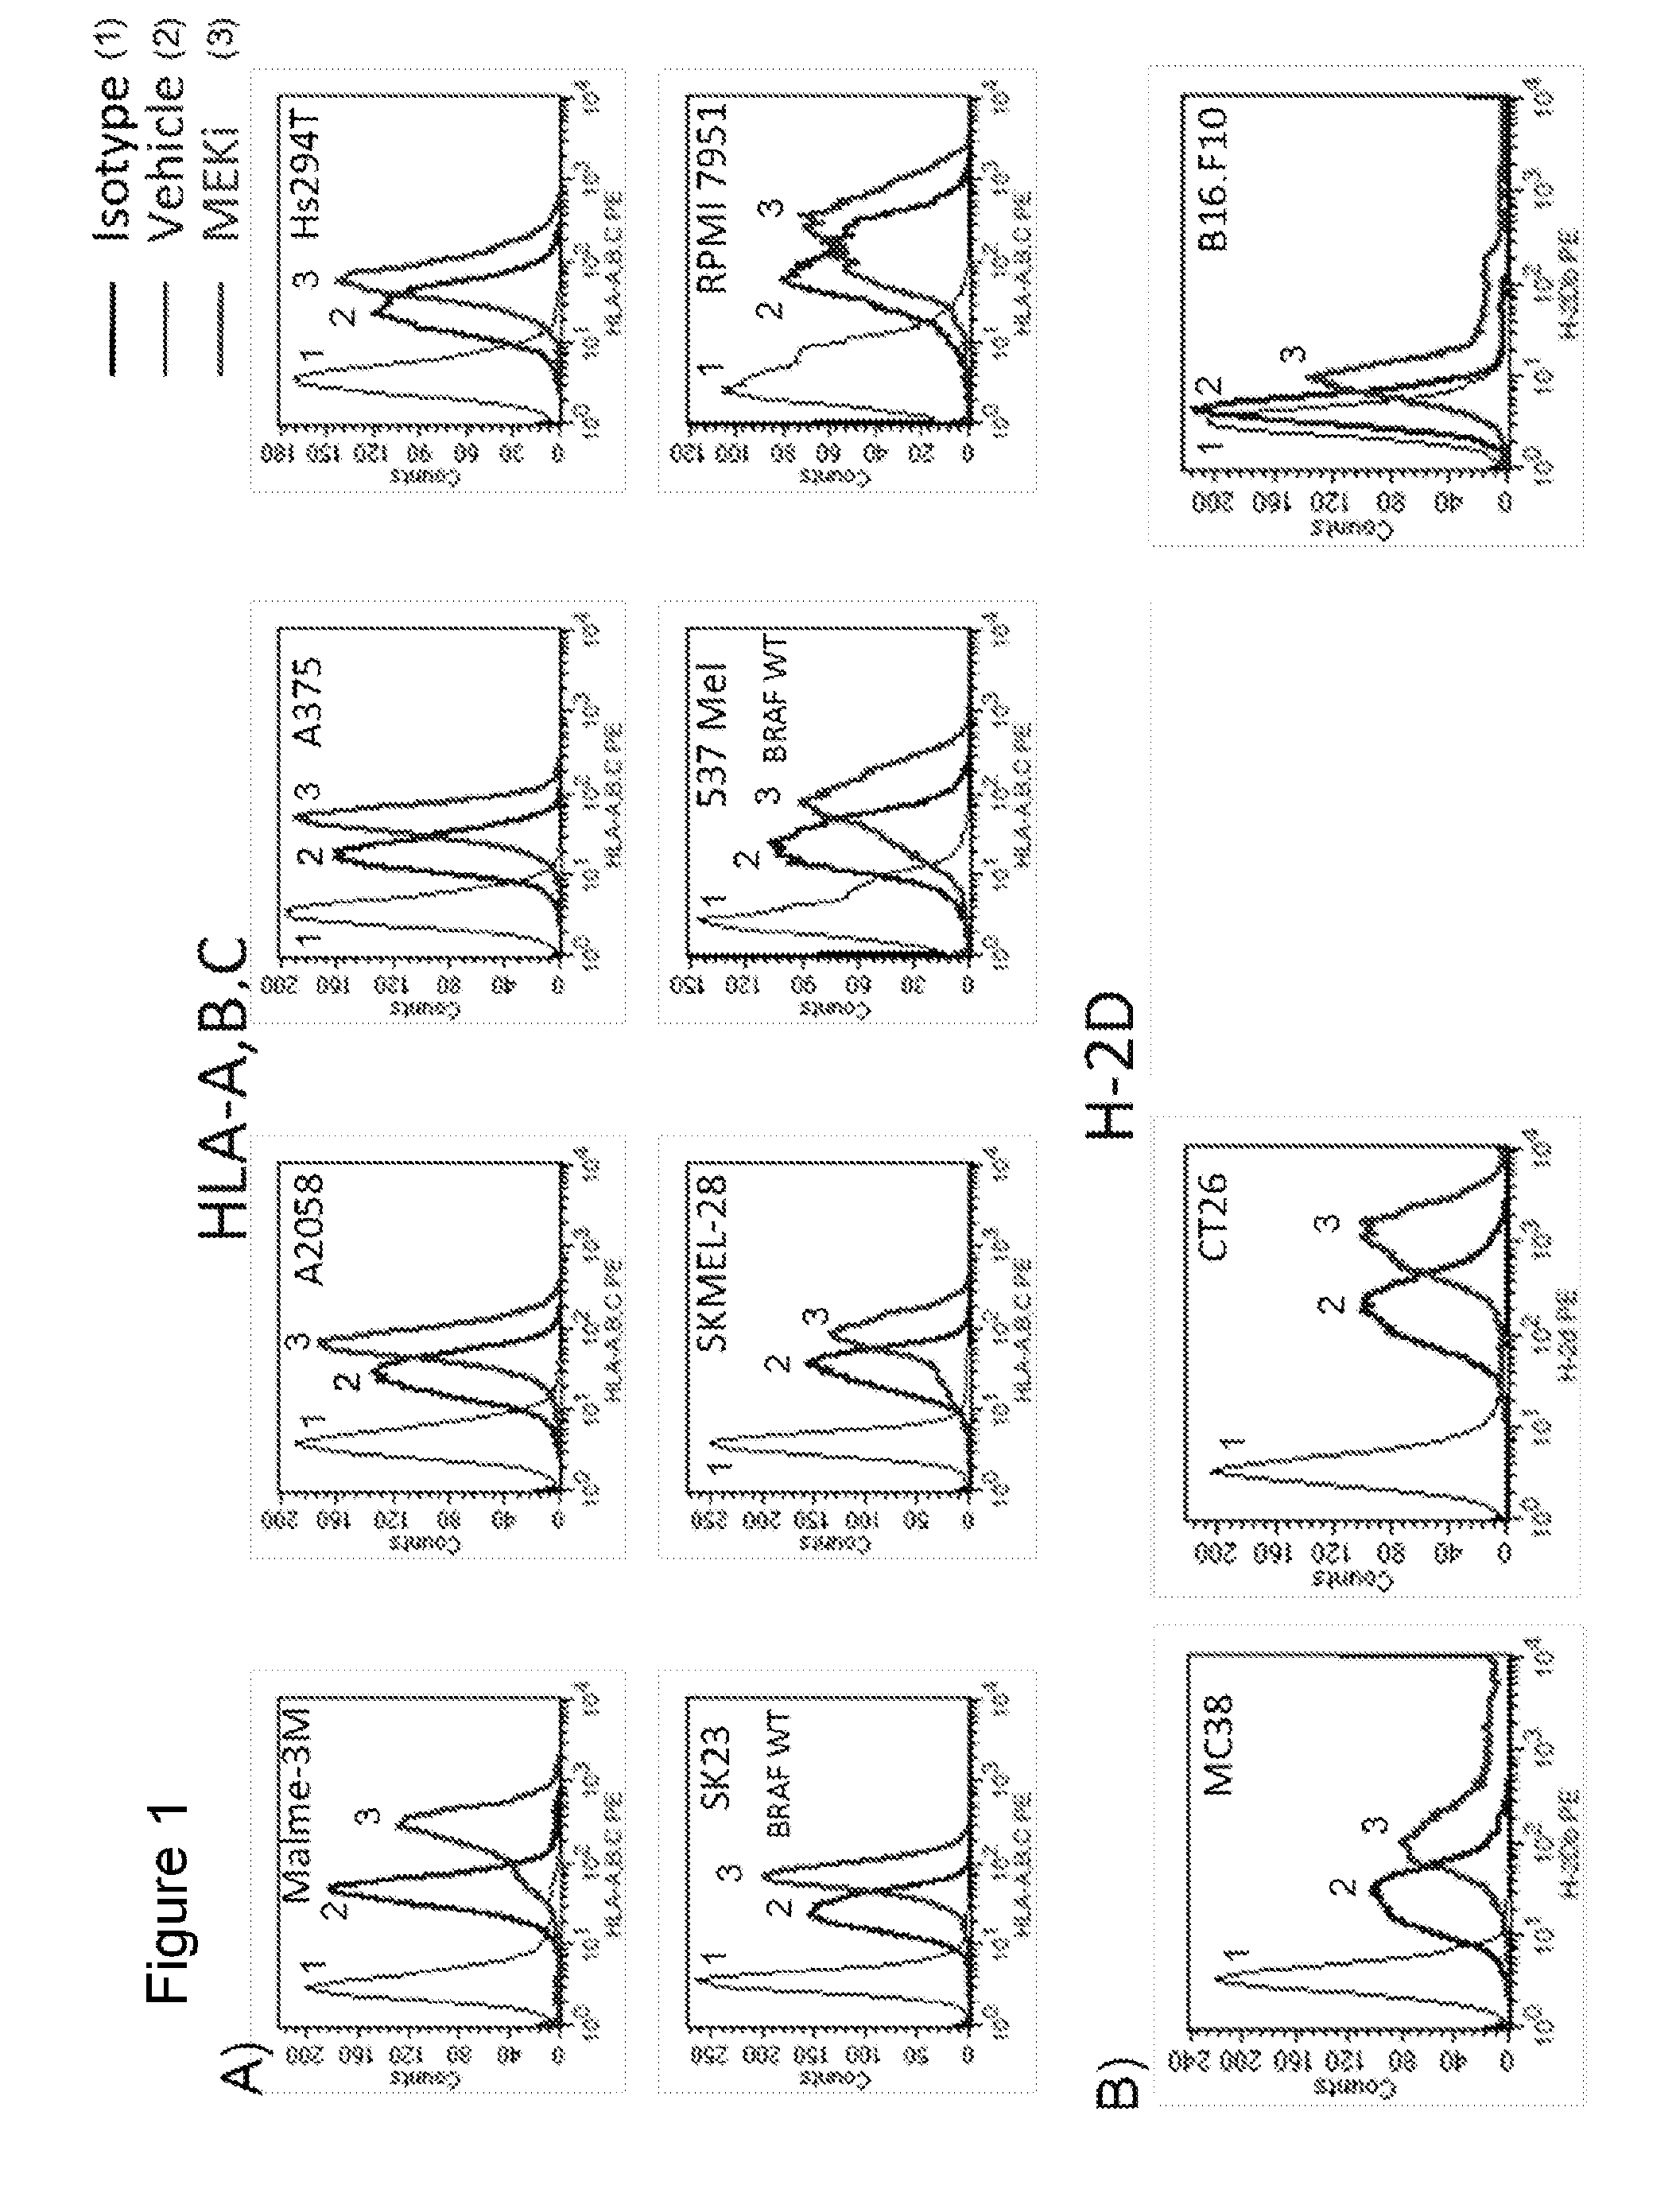 Methods of treating cancer using pd-1 axis binding antagonists and mek inhibitors